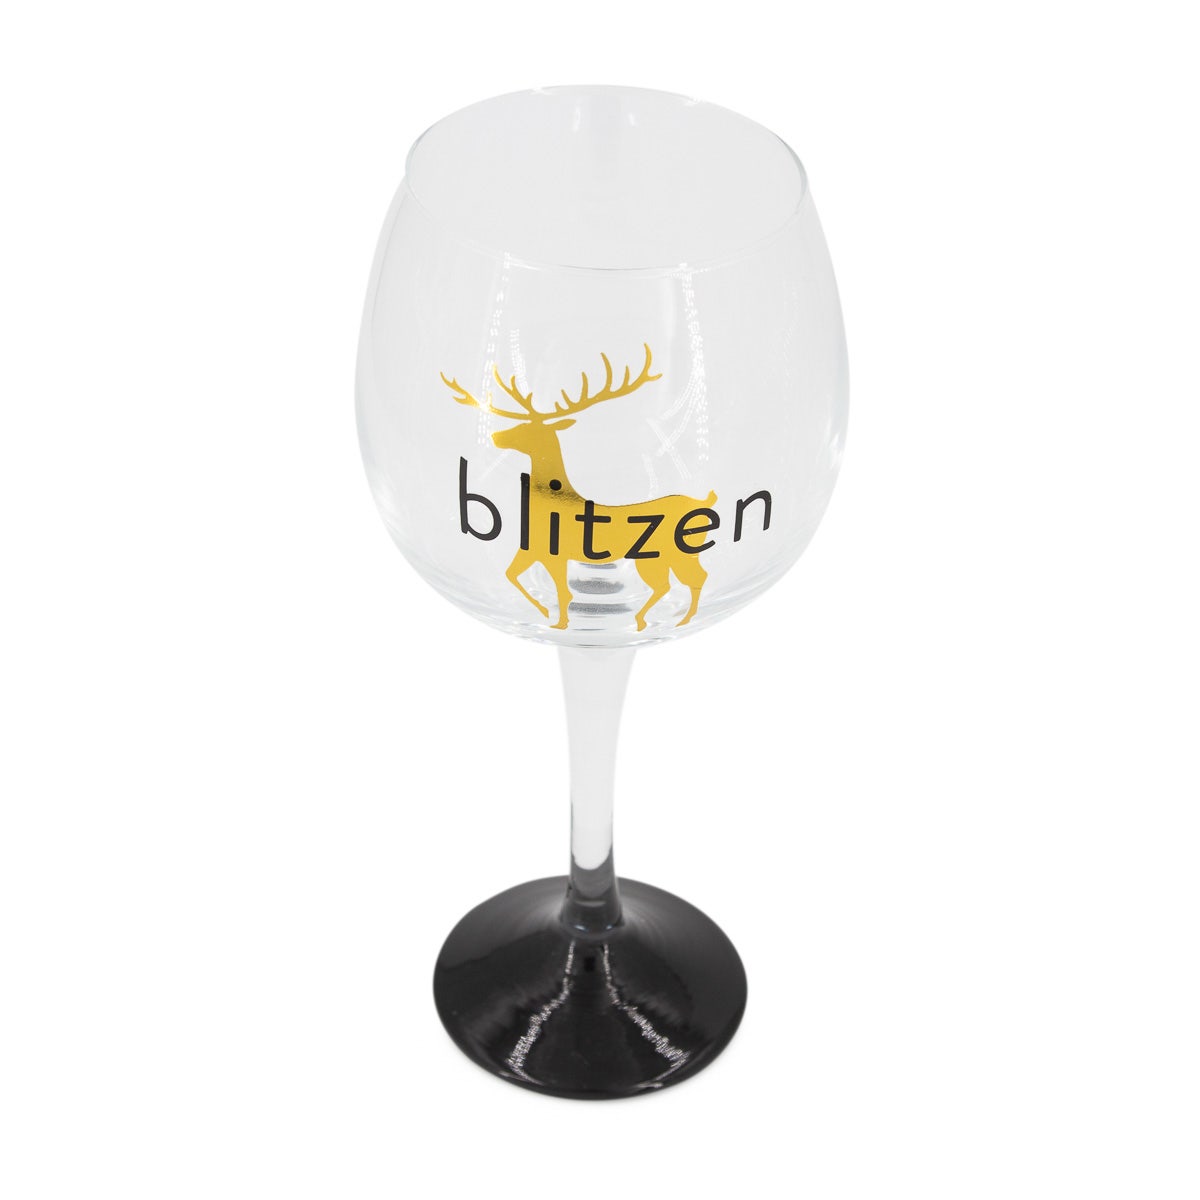 C.r. Gibson Acrylic Wine Glass, Fine and 50